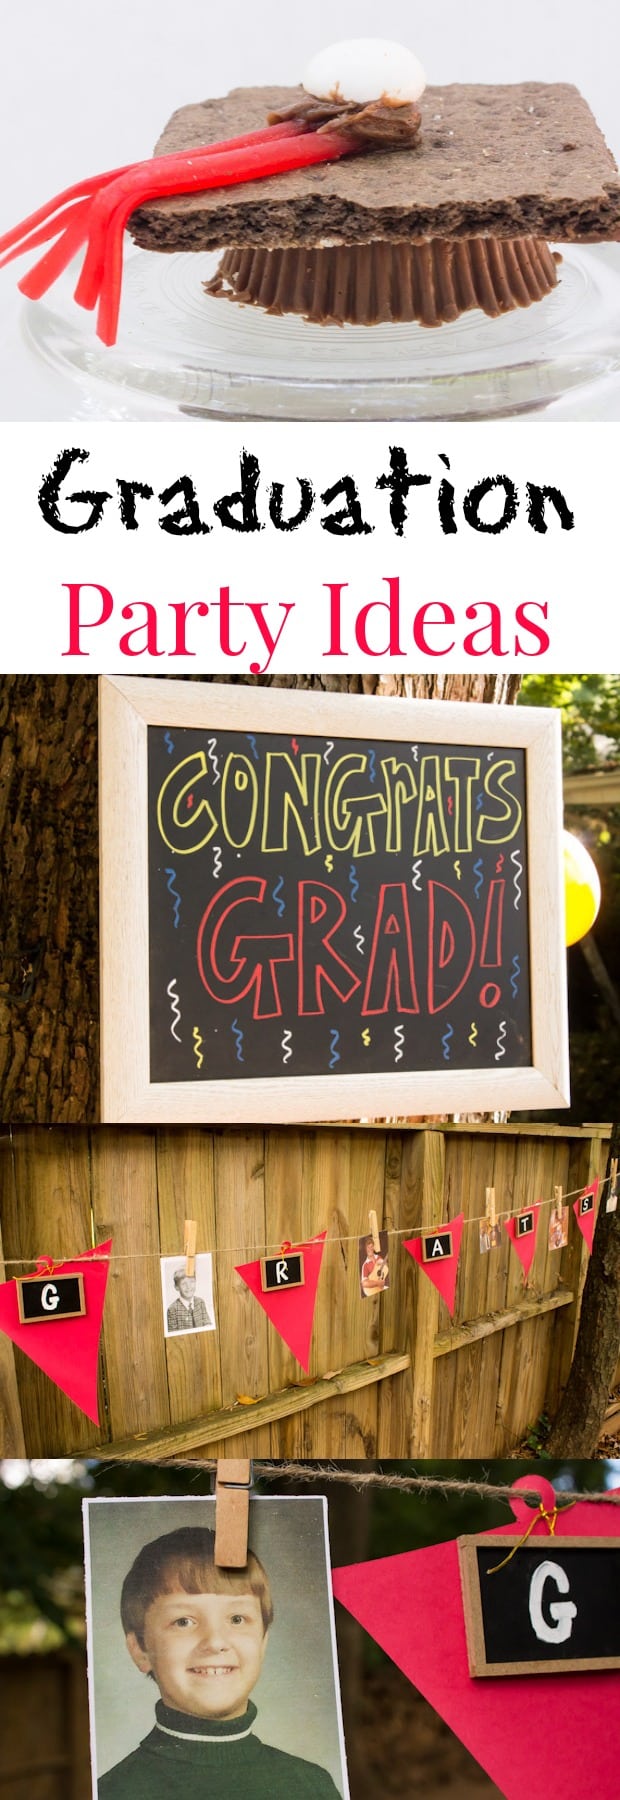 Graduation Party Ideas for All Ages from Marty's Musings